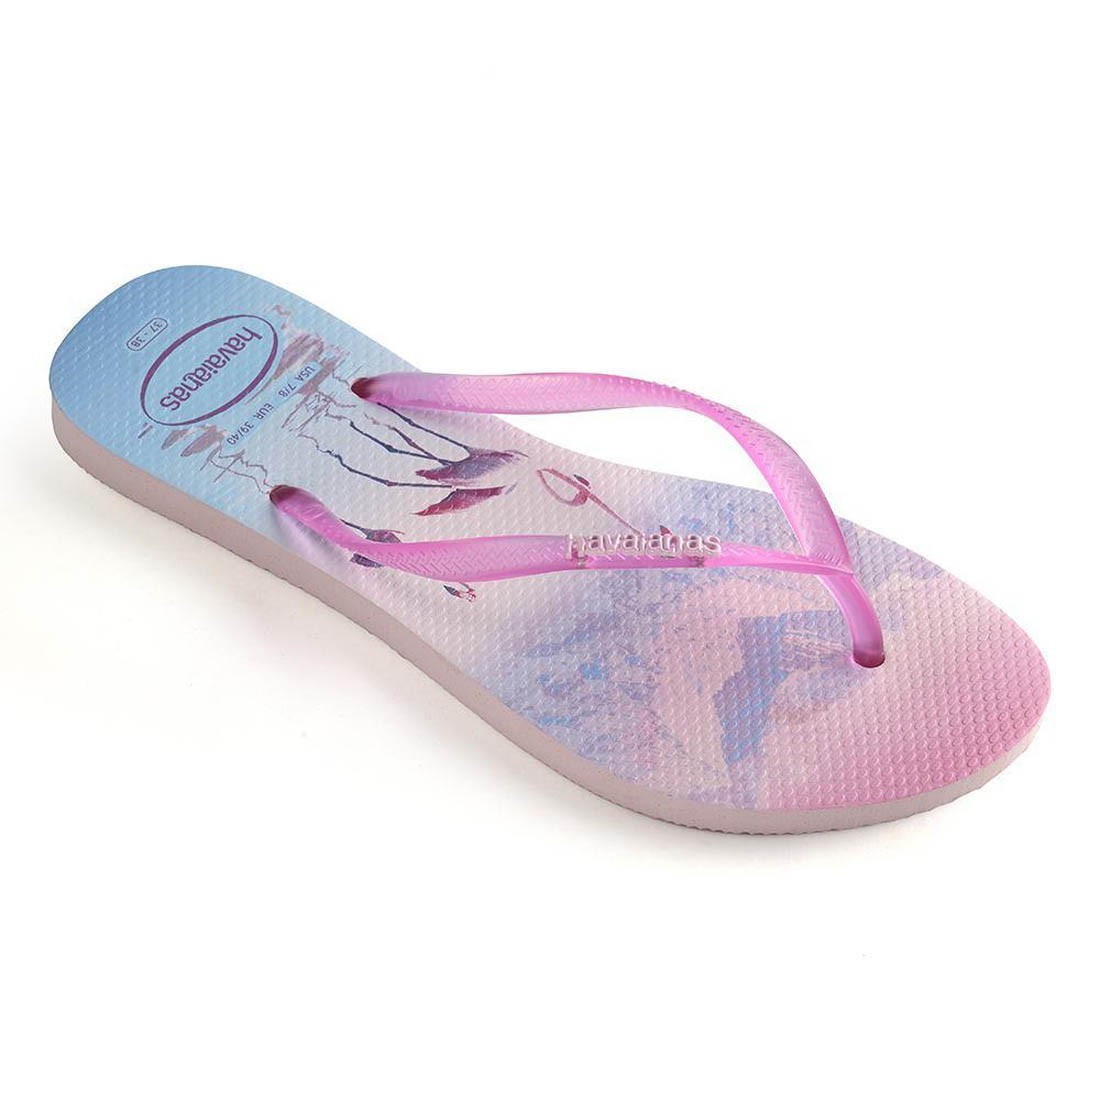 Buy Havaianas Slim Flamingo Pink - Havaianas, delivered to your home | The  Outfit